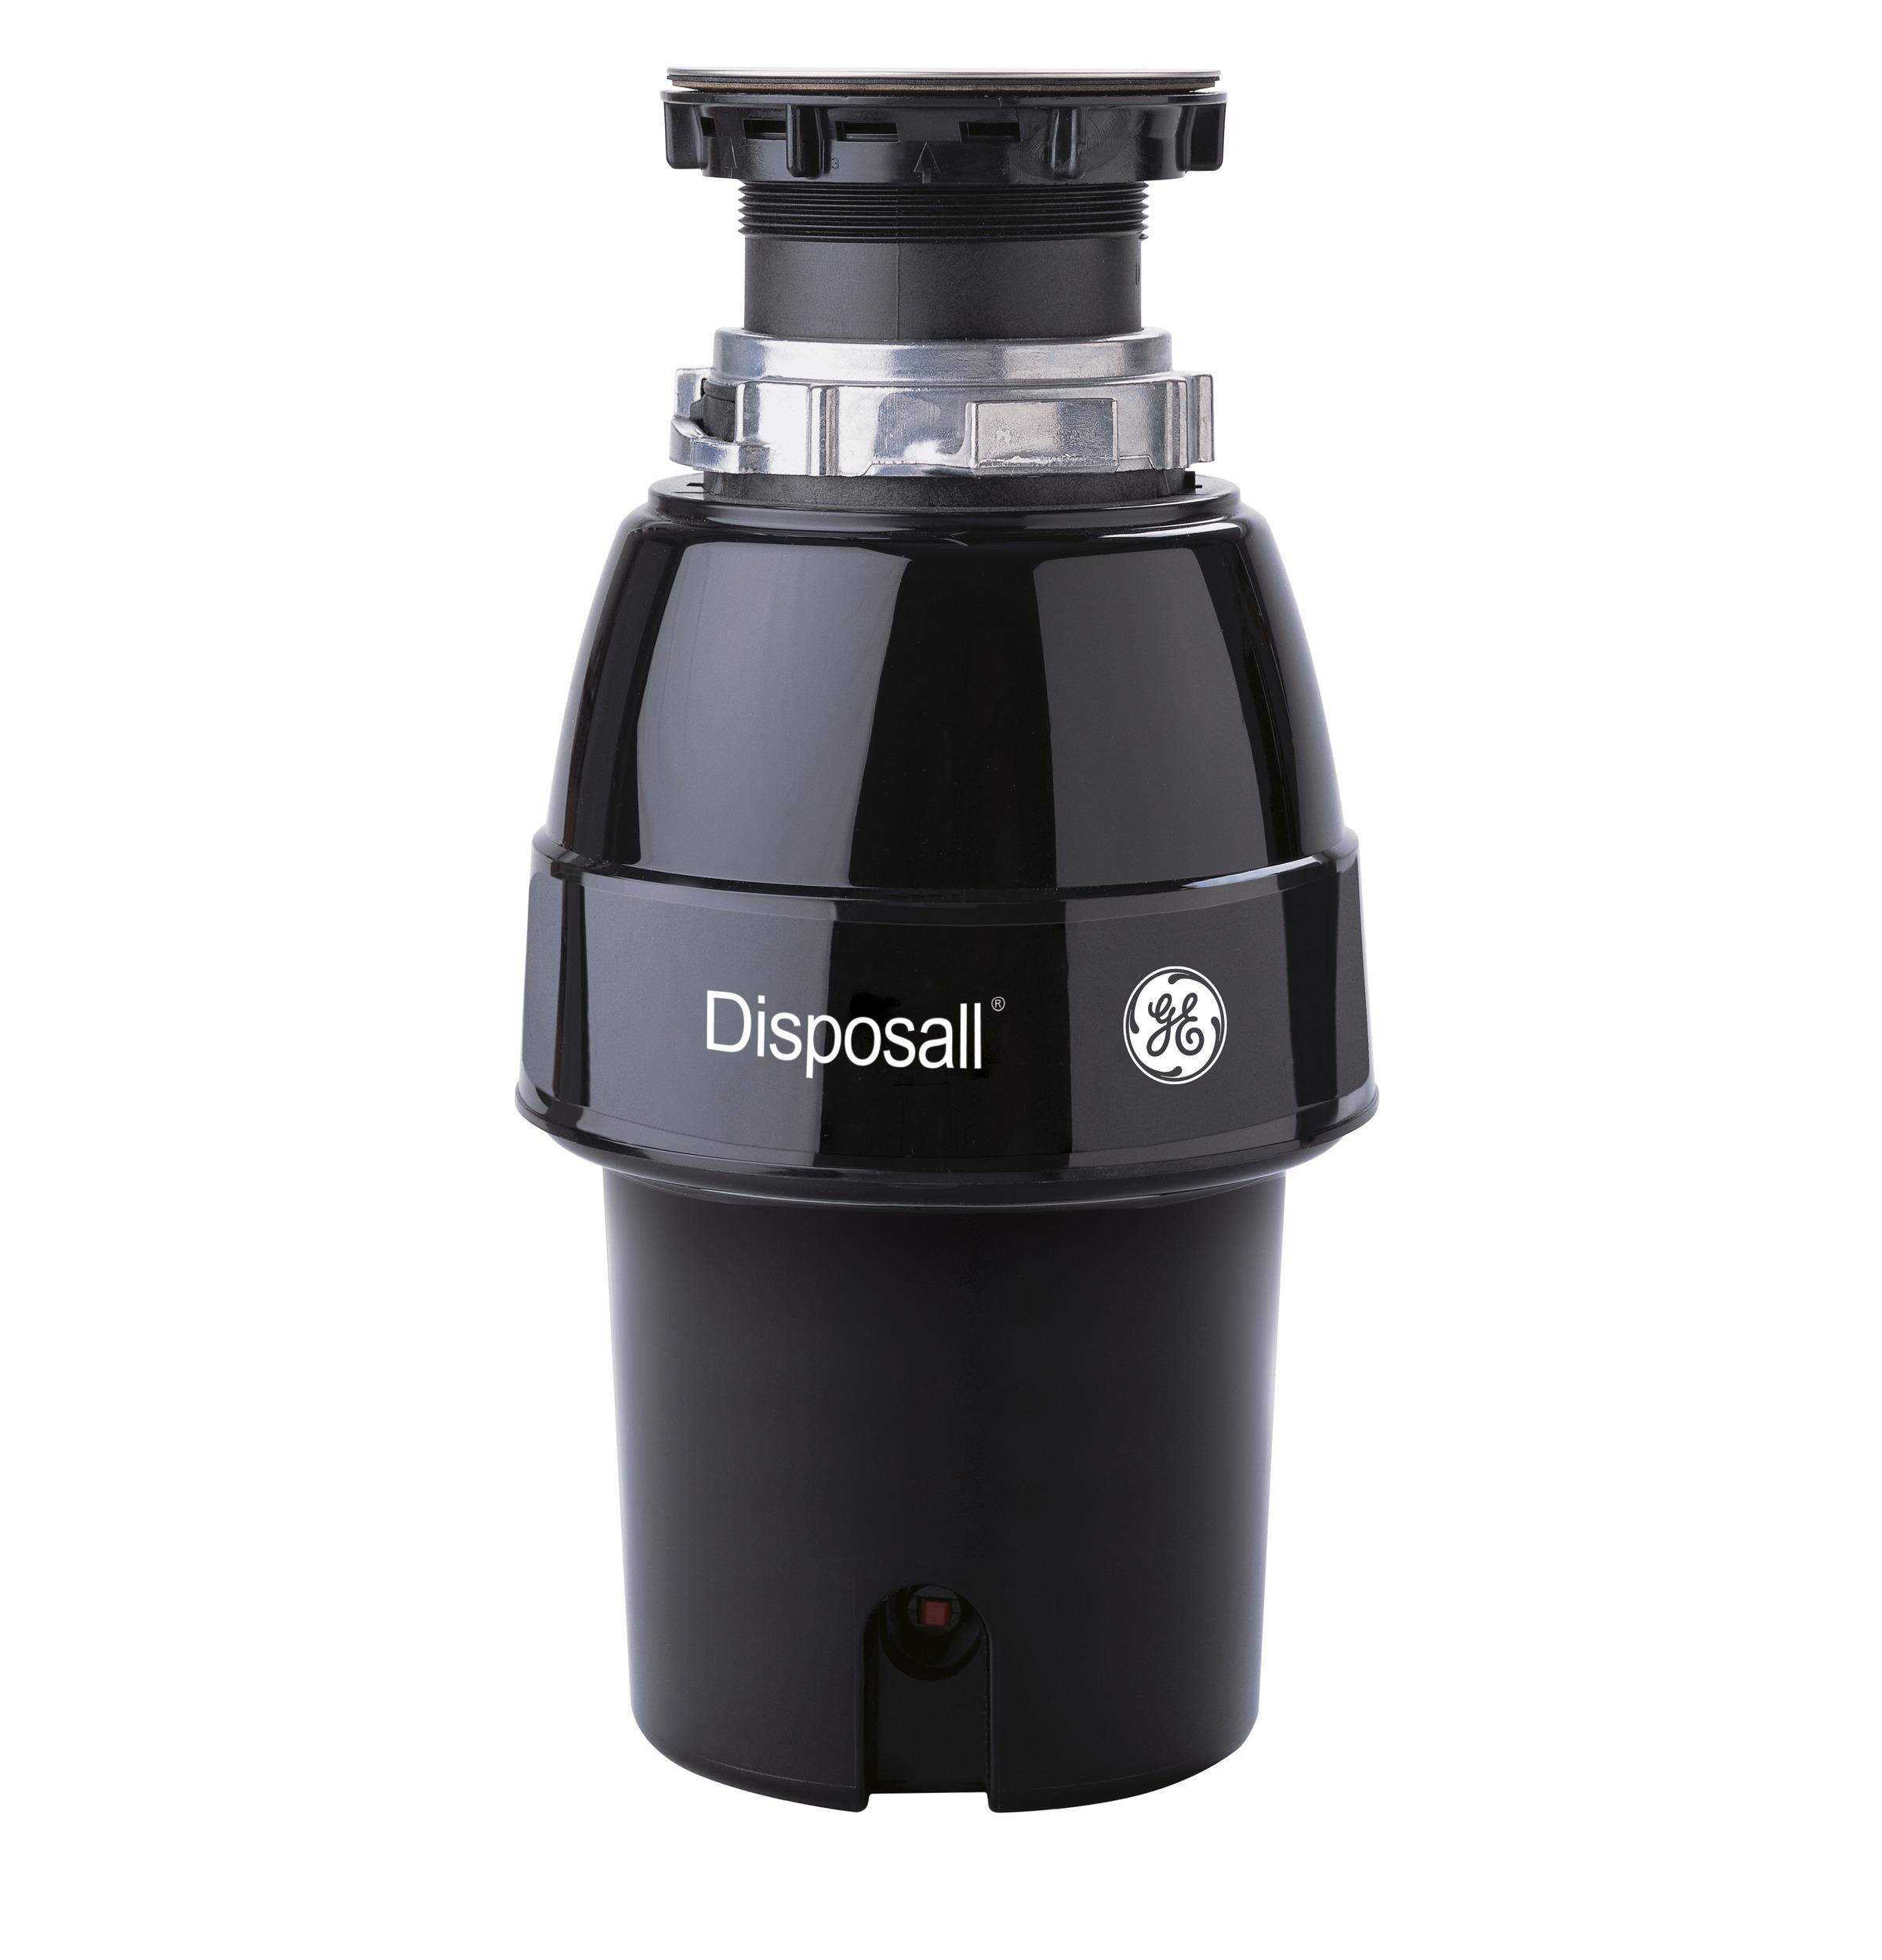 GE DISPOSALL® 1/2 HP Continuous Feed Garbage Disposer Non-Corded